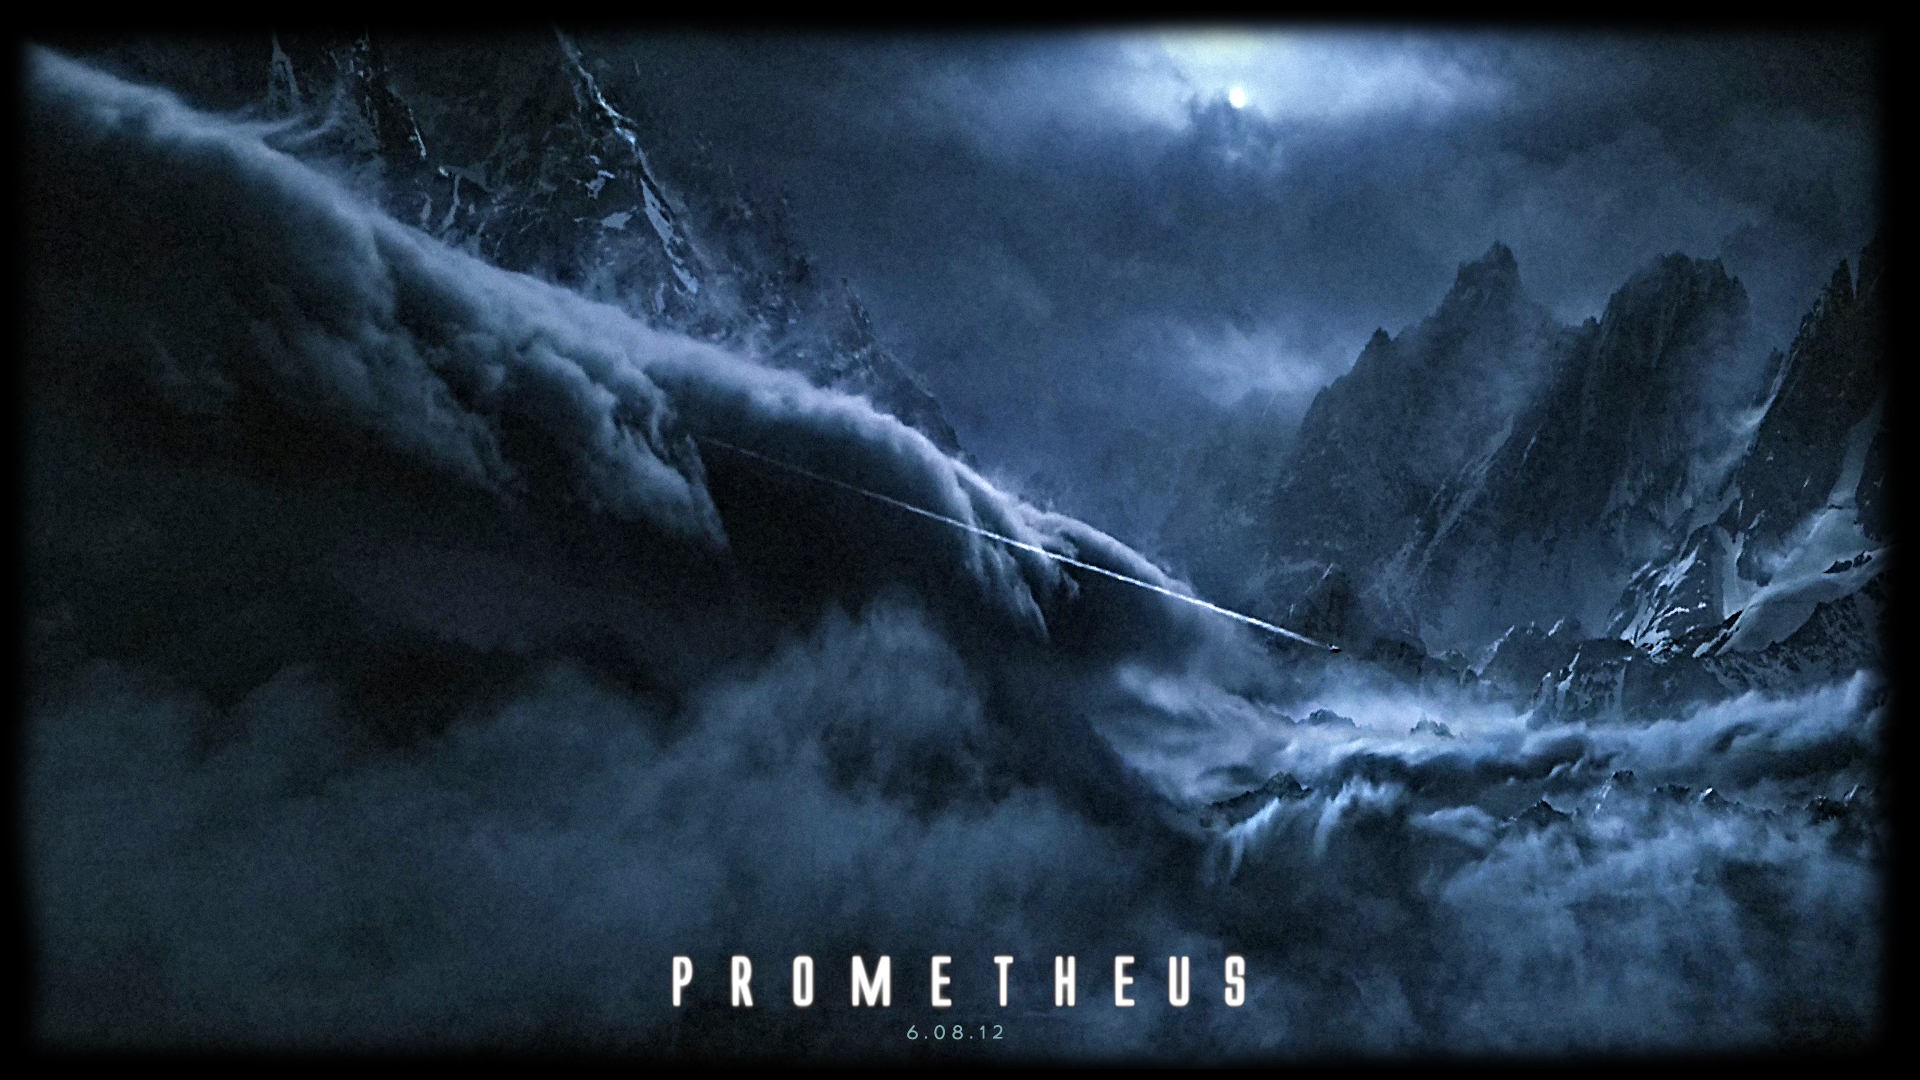 HD Wallpaper From Prometheus By Ridley Scott Movie